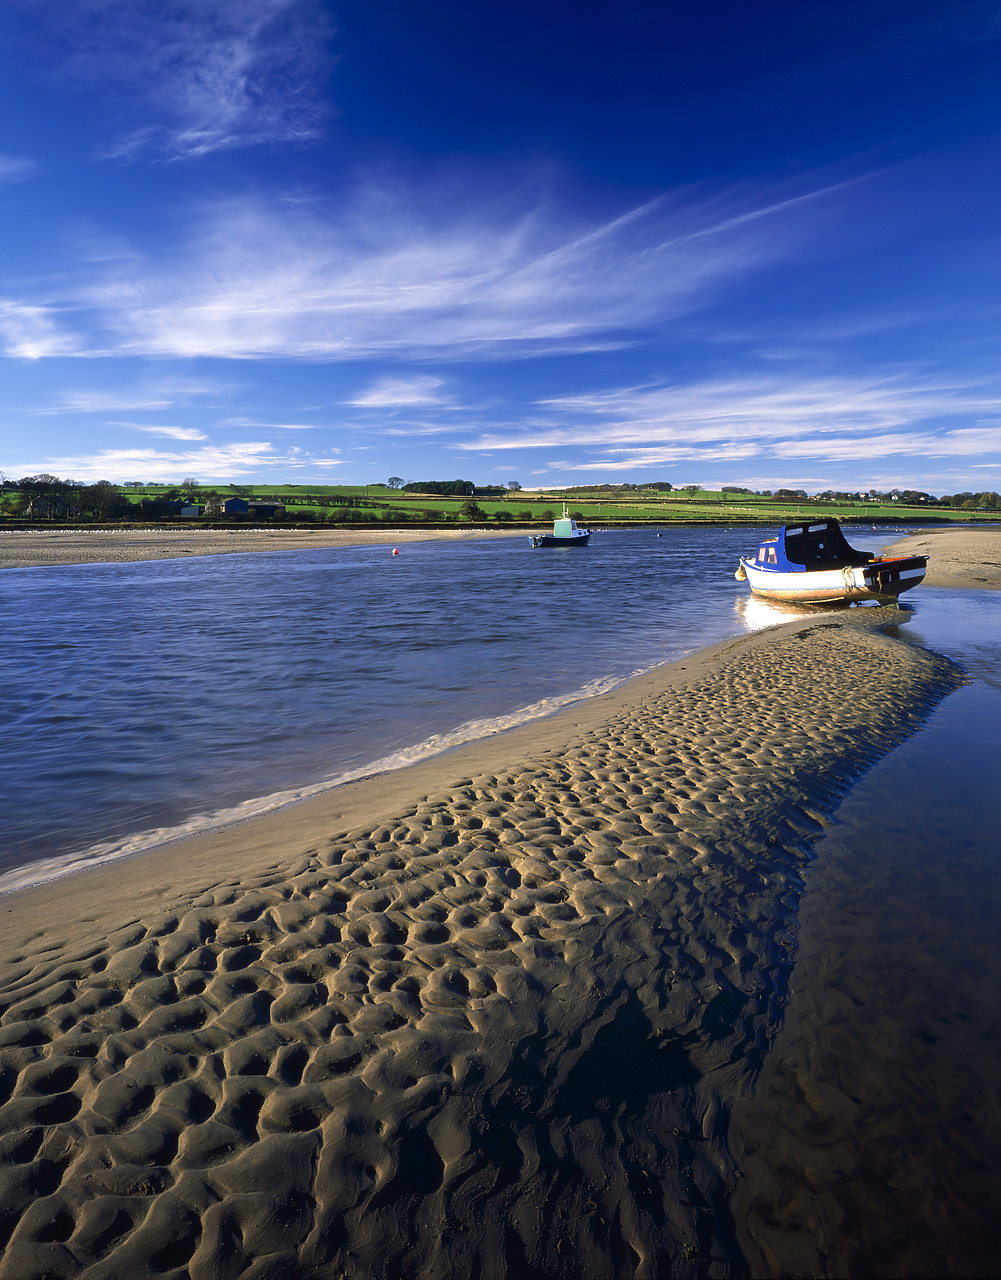 #010381-3 - Boats at Low Tide, Alnmouth, Northumberland, England